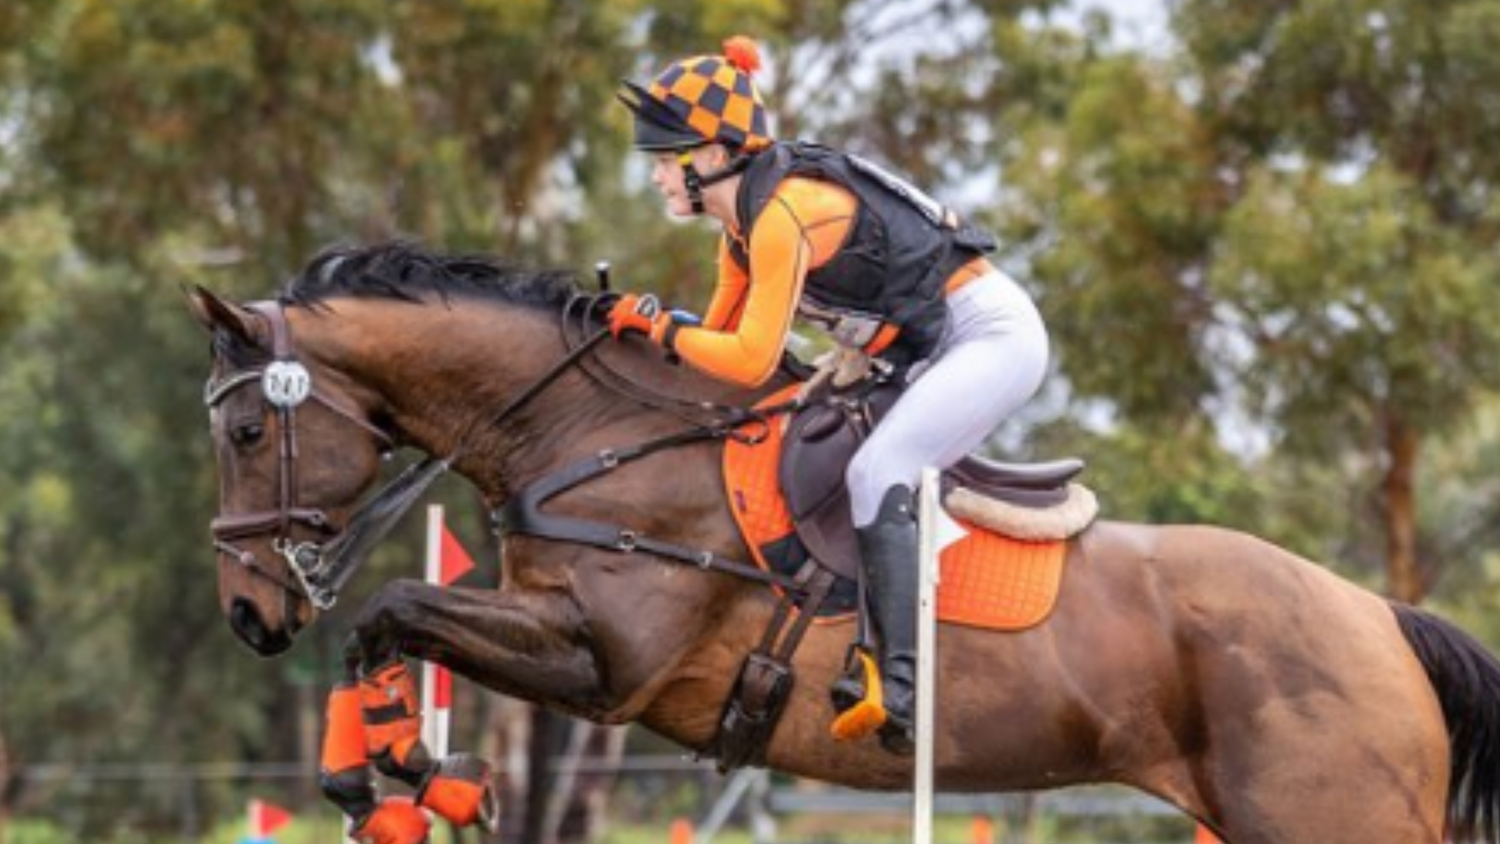 Powered by Provex, Hunter rides like a superstar thanks to Provex.